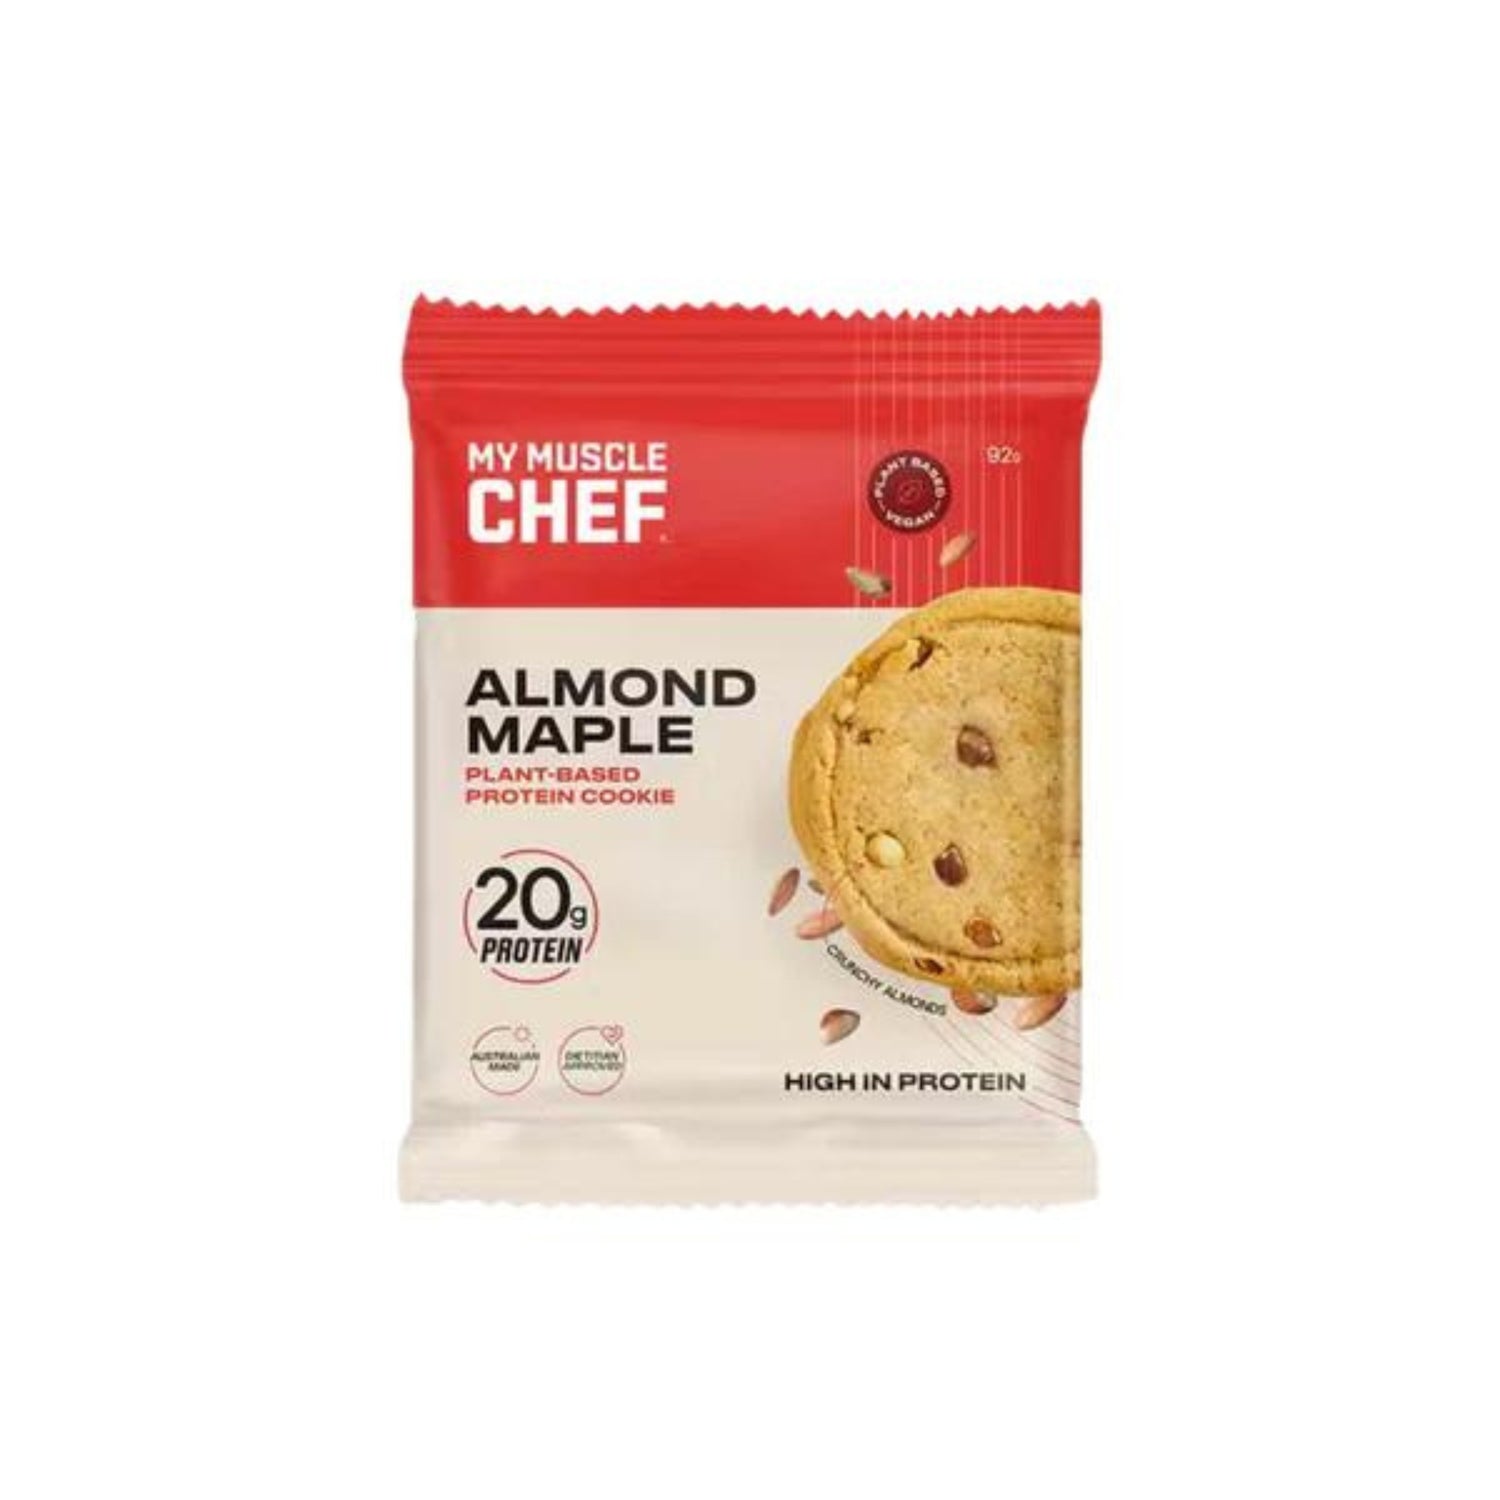 My Muscle Chef Cookie - Almond Maple